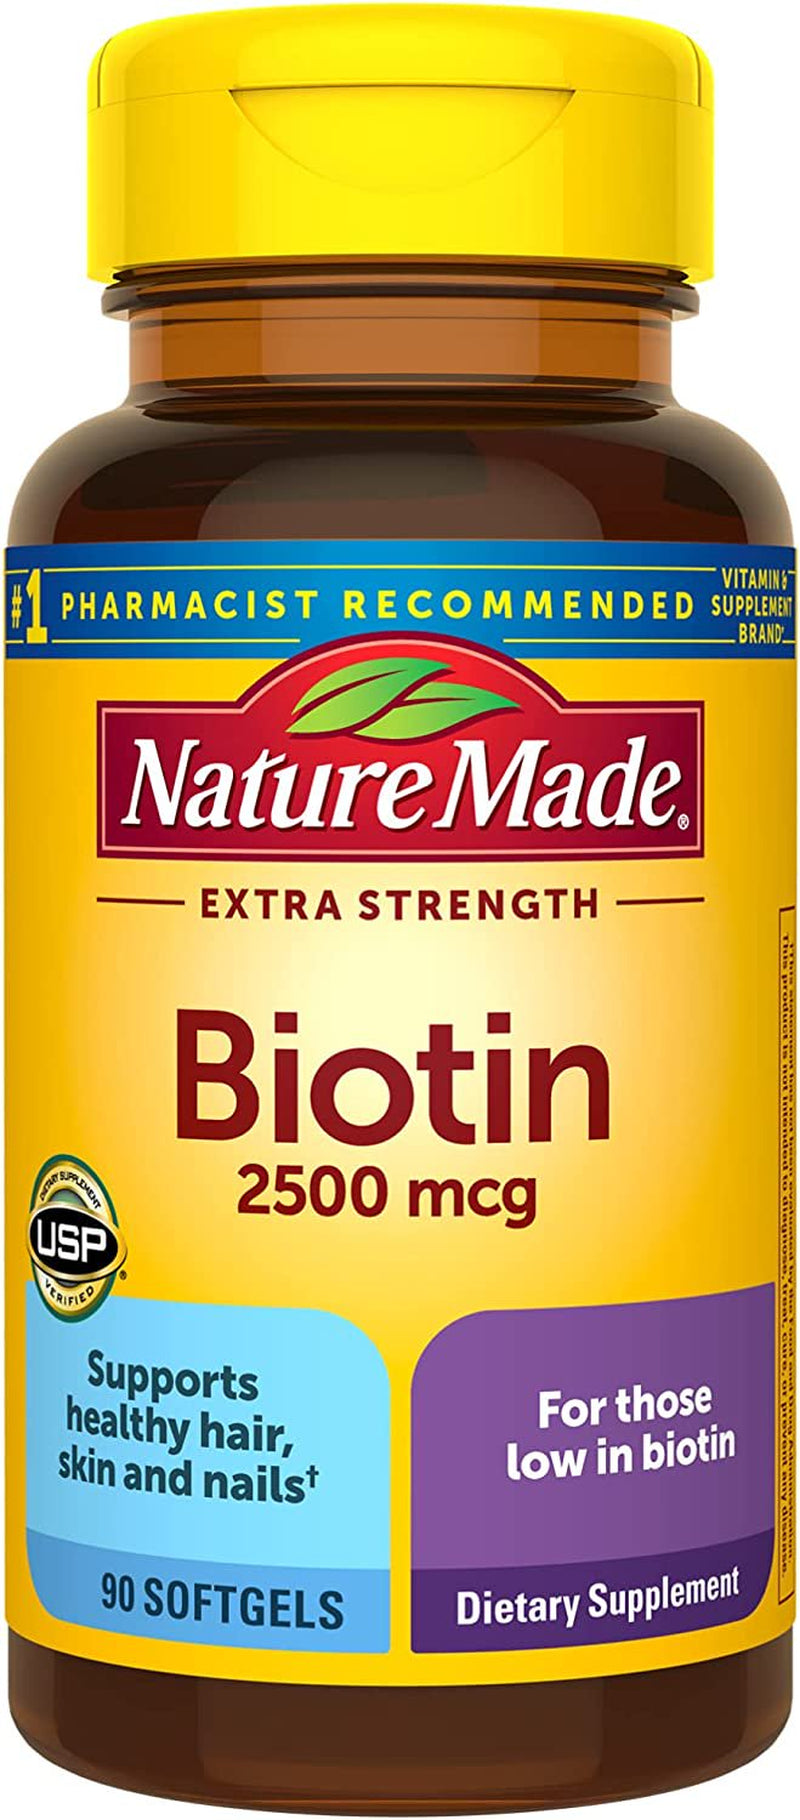 Strength Biotin 2500 Mcg, Dietary Supplement for Healthy Hair, Skin & Nail Support, 90 Softgels, 90 Day Supply